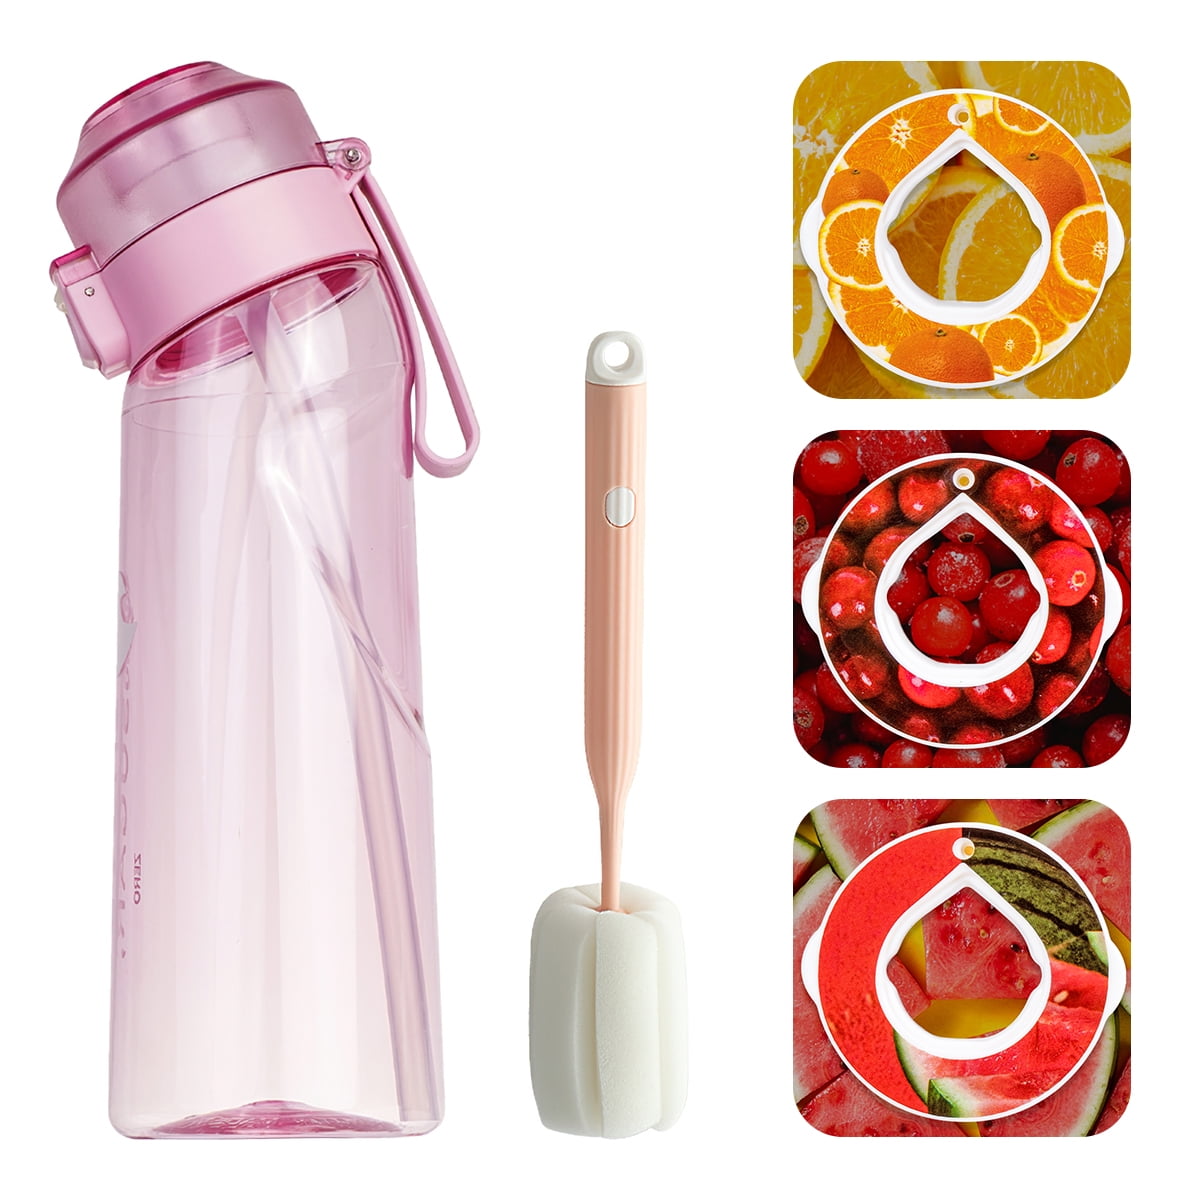 Air Up Water Bottle With Flavor Pods,650ml Flavouring Water Bottle